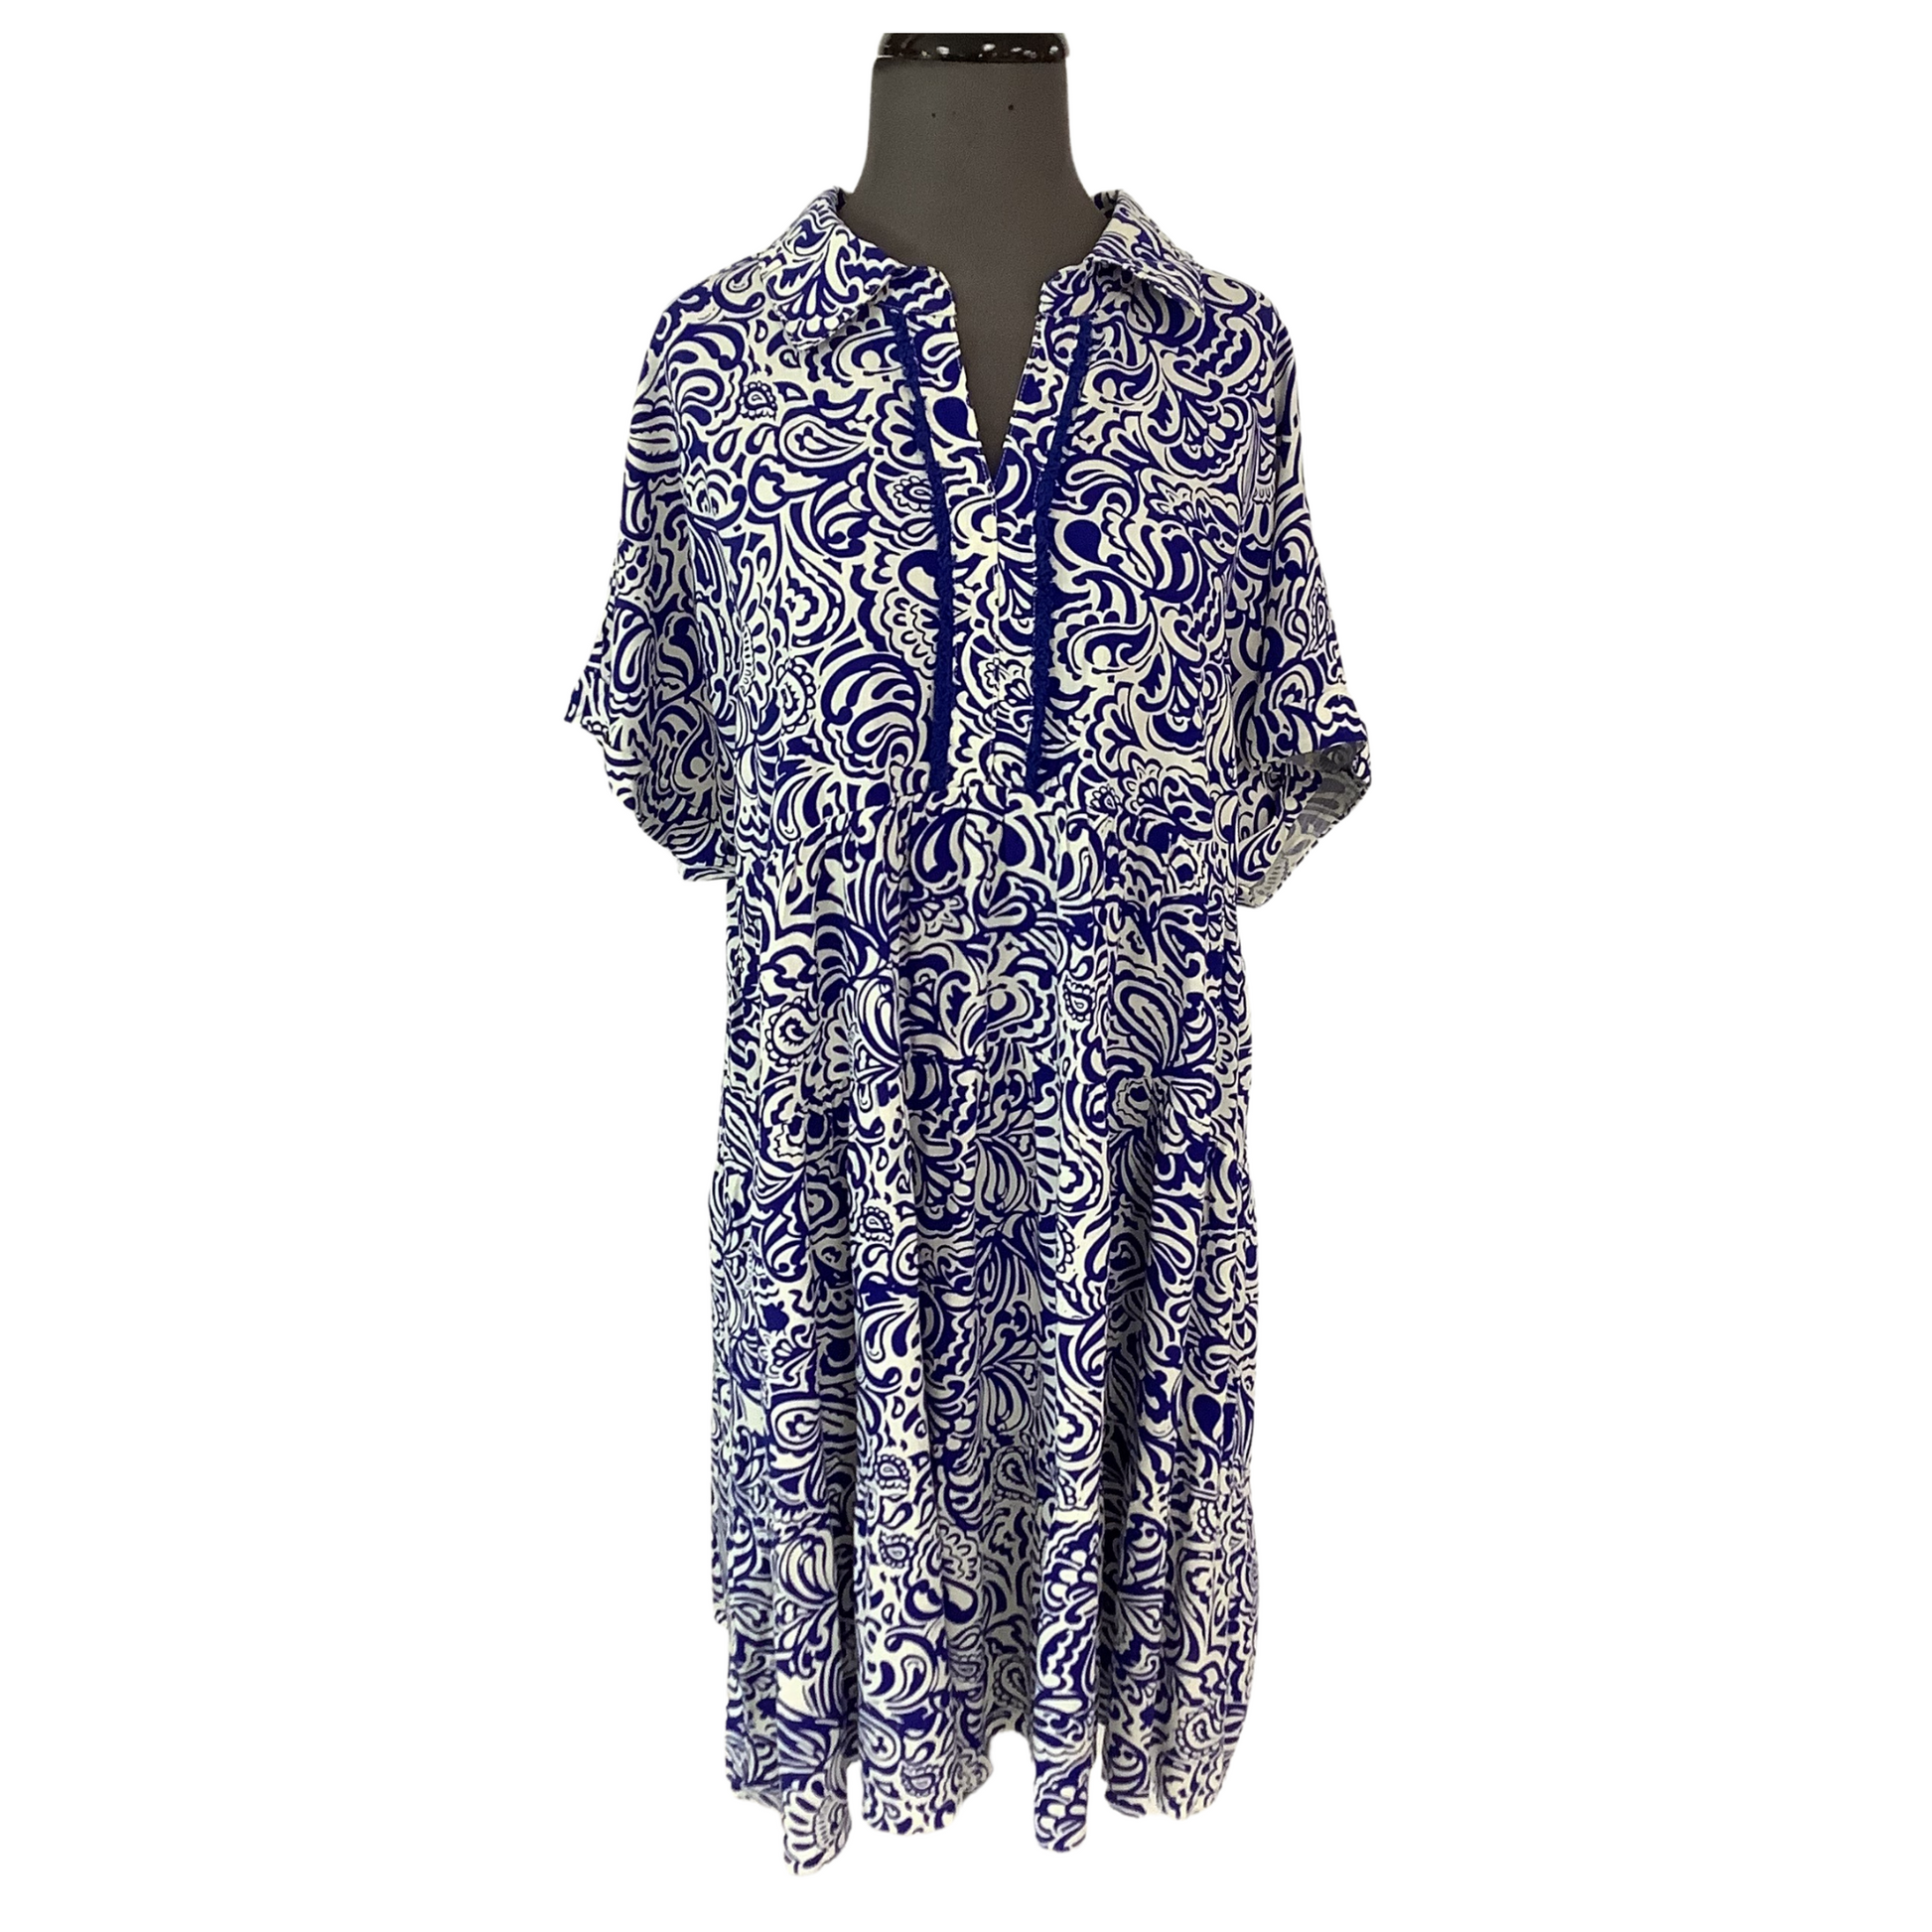 Look graceful and chic with this sophisticated blue mini dress from our abstract print collection. Featuring a collar and a flattering V-neck, this dress is perfect for any special occasion. Plus-sized, it emphasizes your curves and offers you a flattering, comfortable fit.